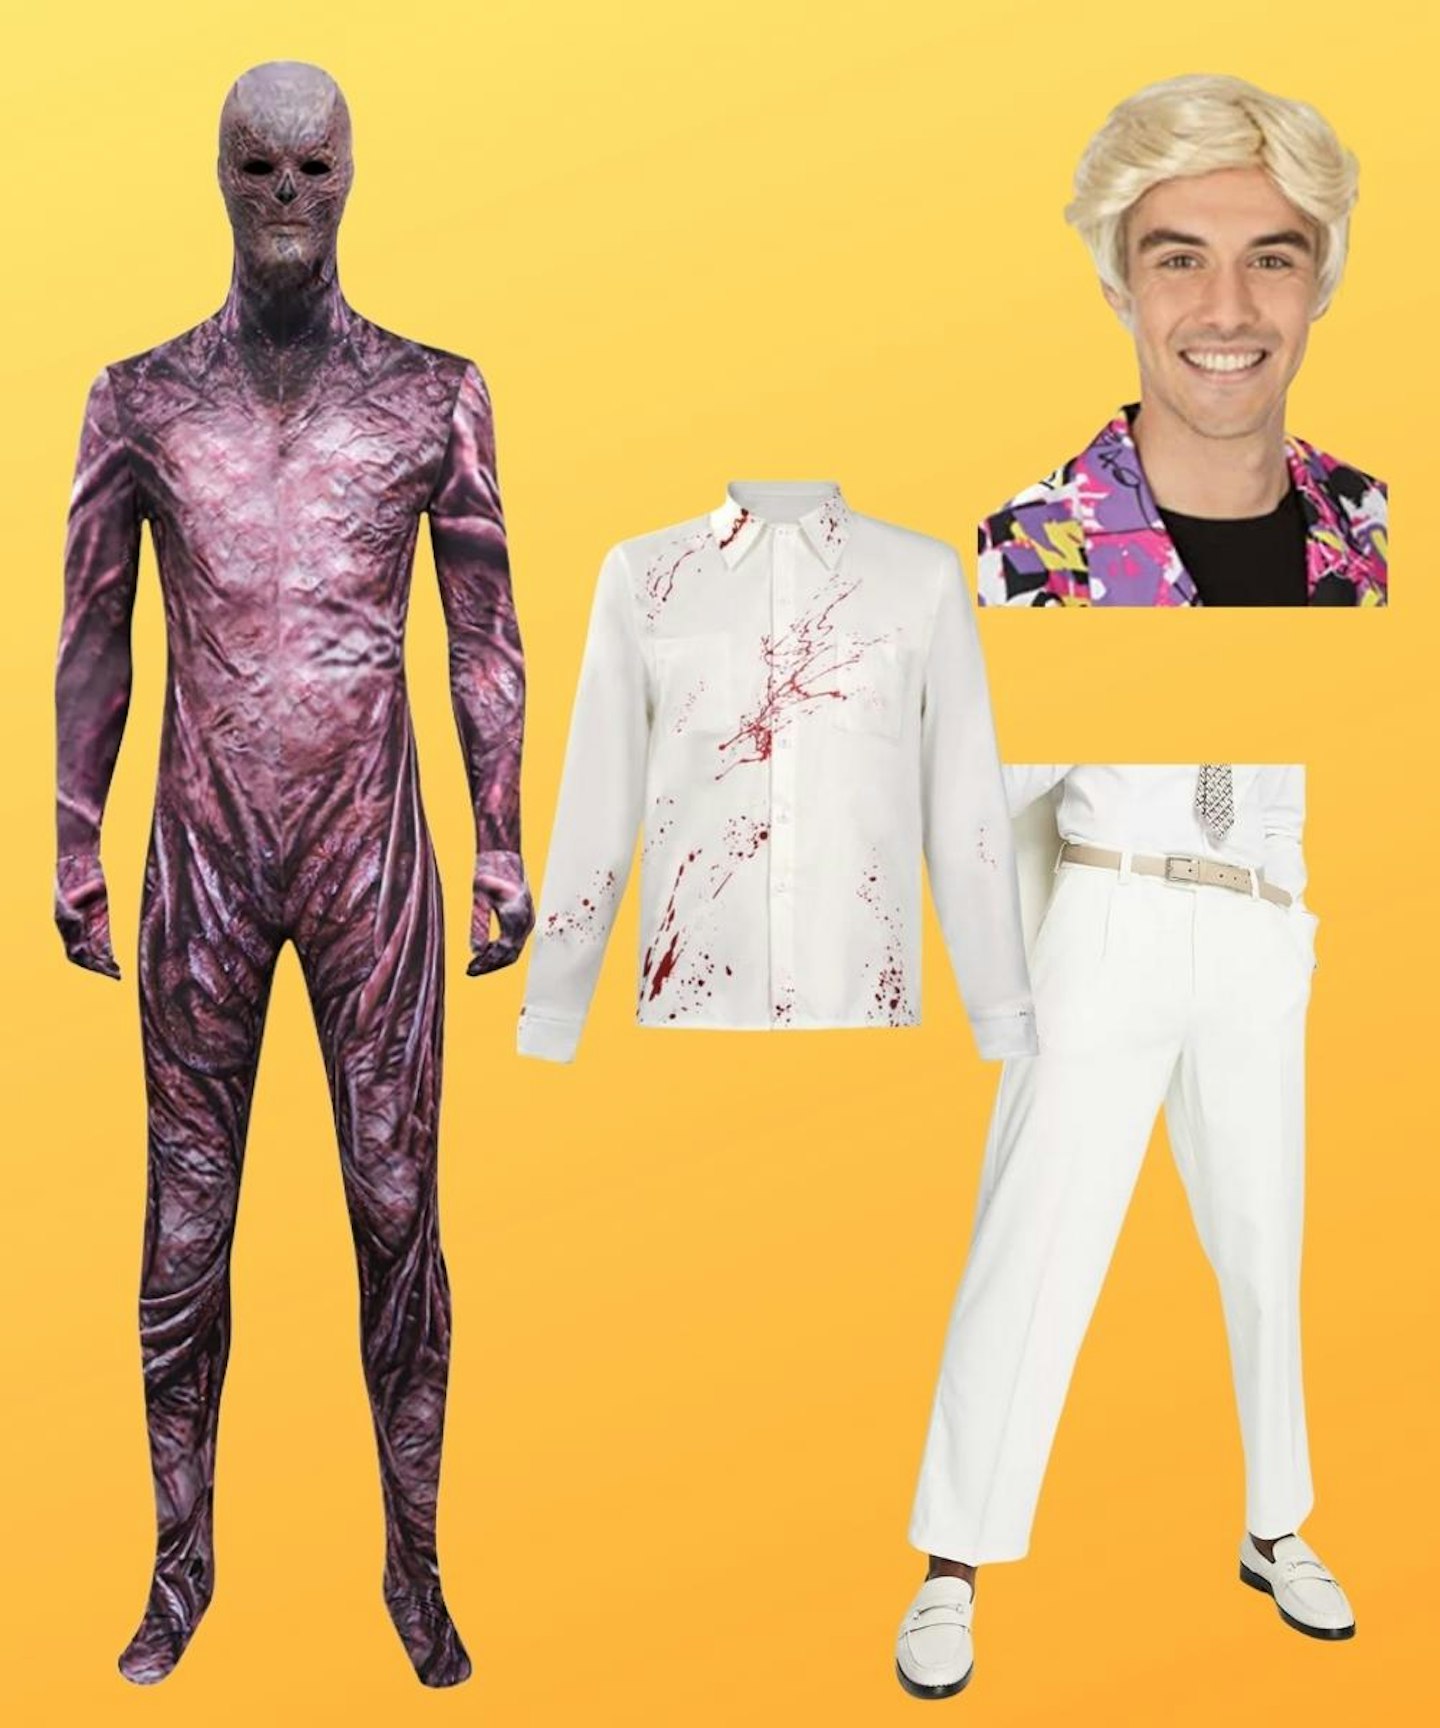 Vecna/One's Morph Suit & Bloody Shirt Costume